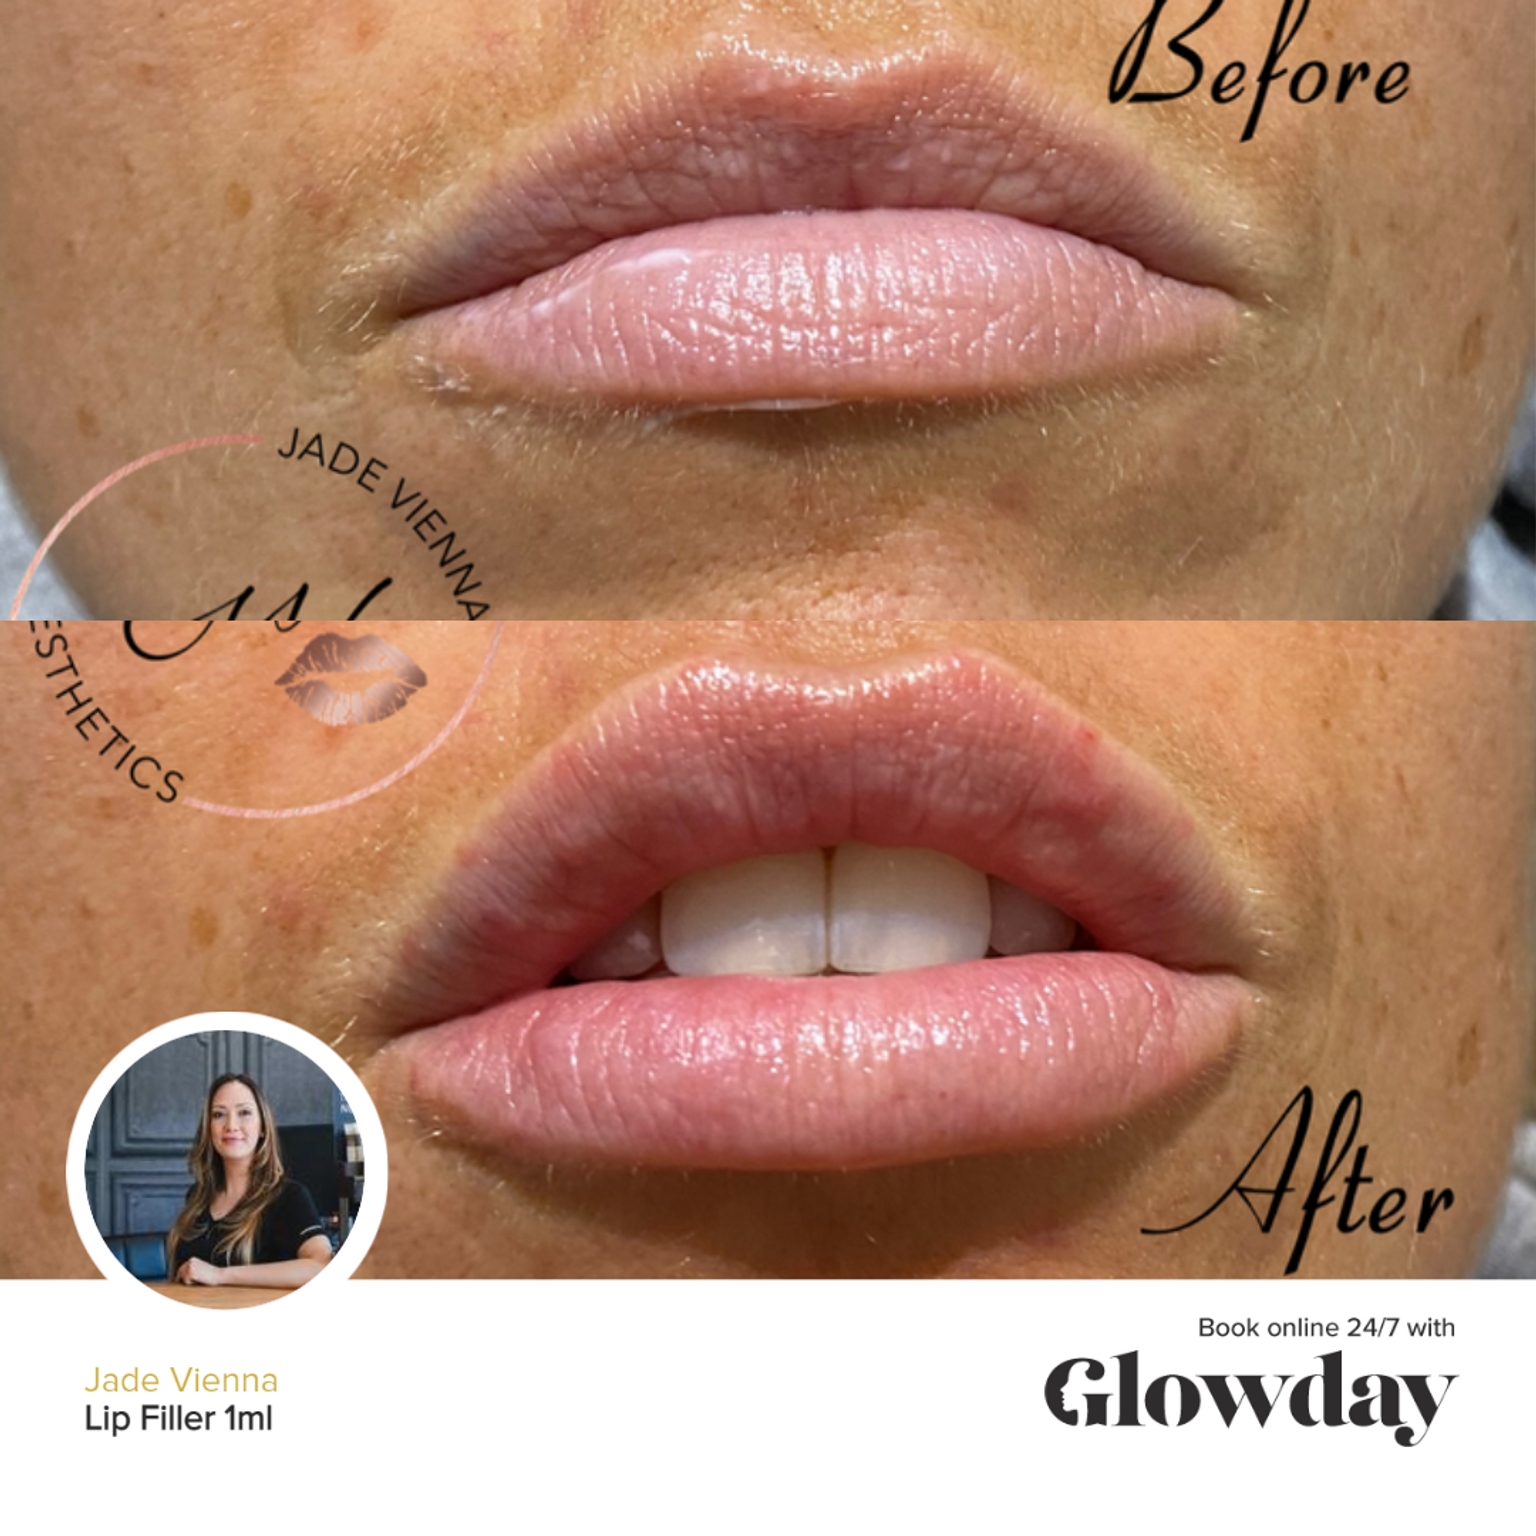 Jade Vienna - Lip Fillers Before and After - Glowday 